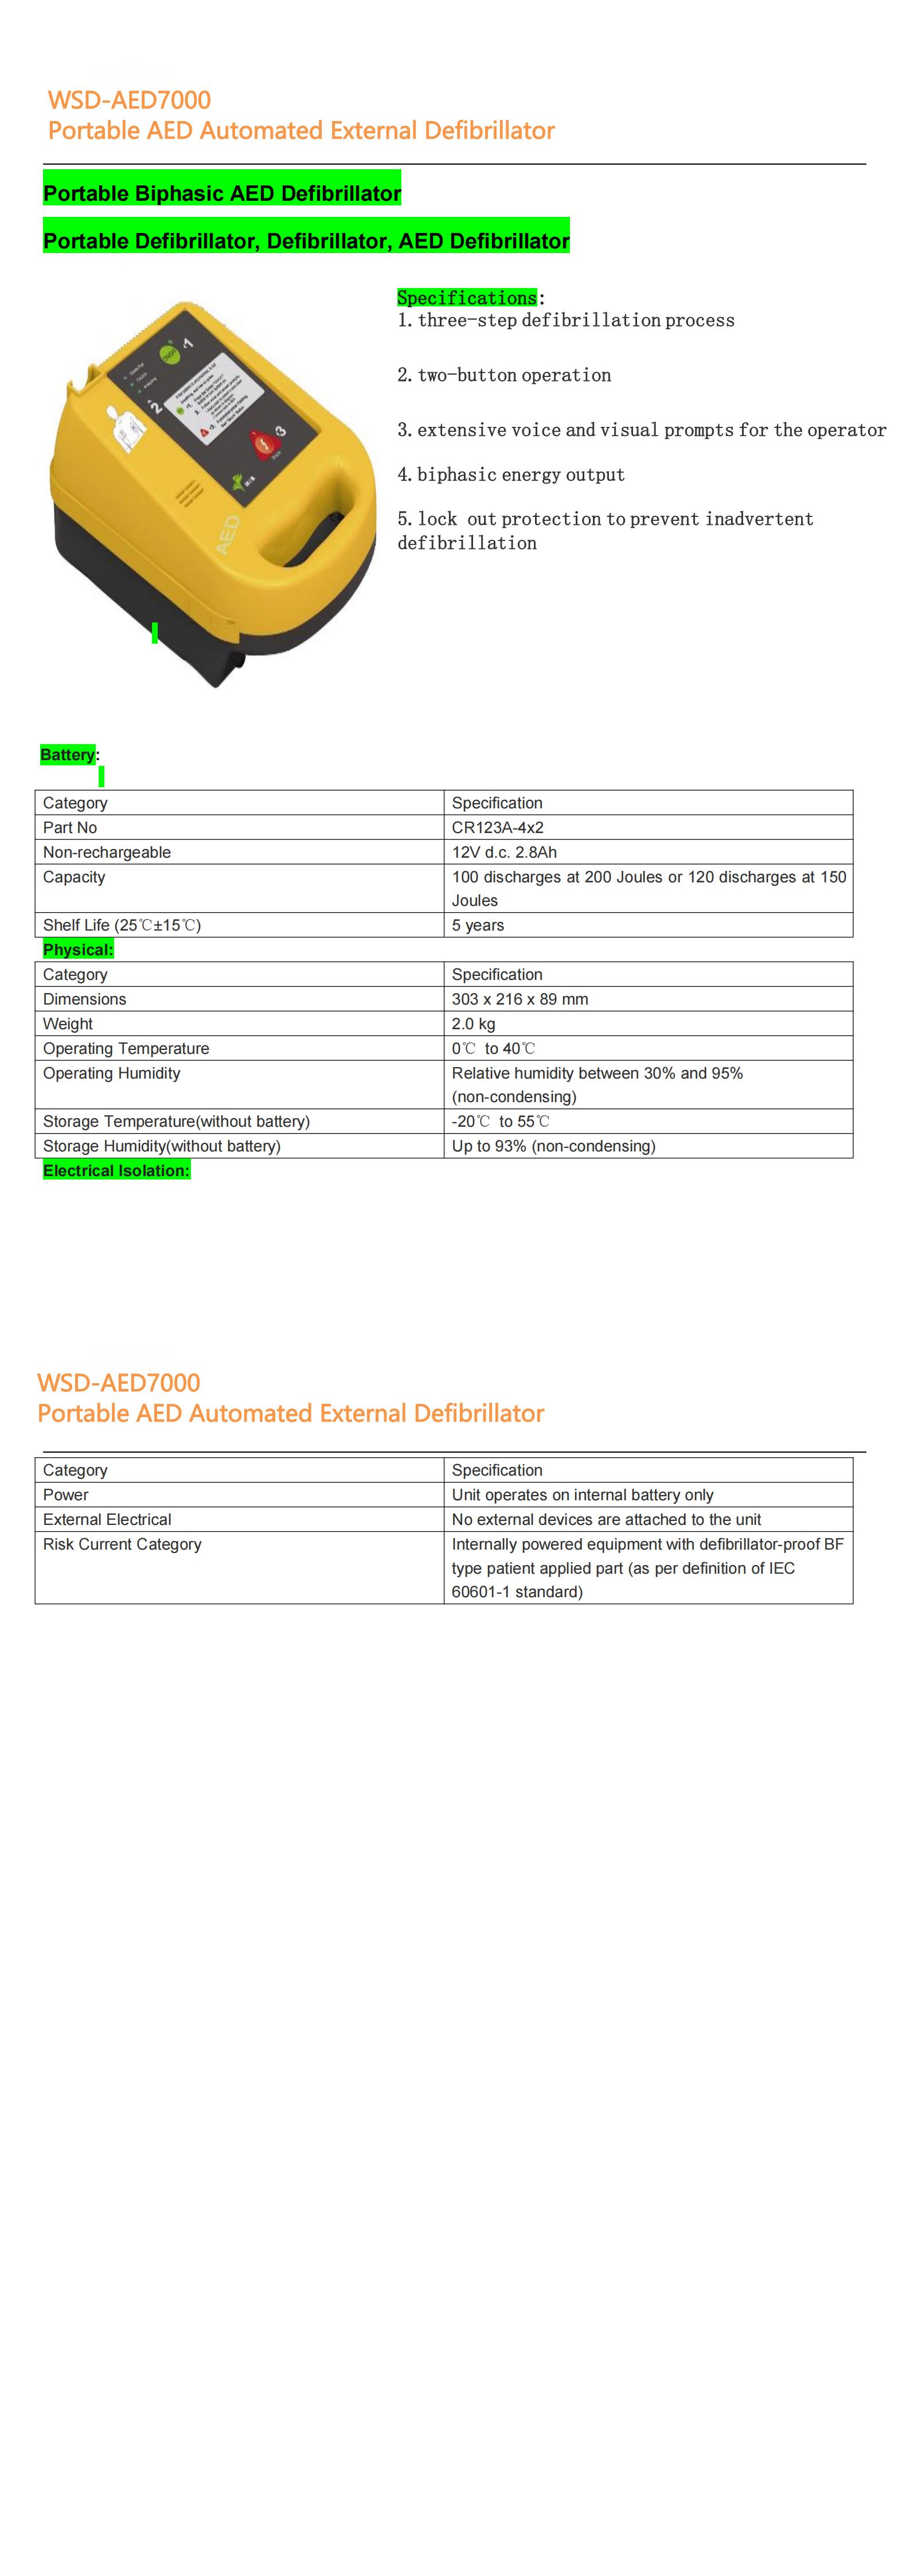 WSD-AED7000 Portable AED Automated External Defibrillator Catalog_00.jpg